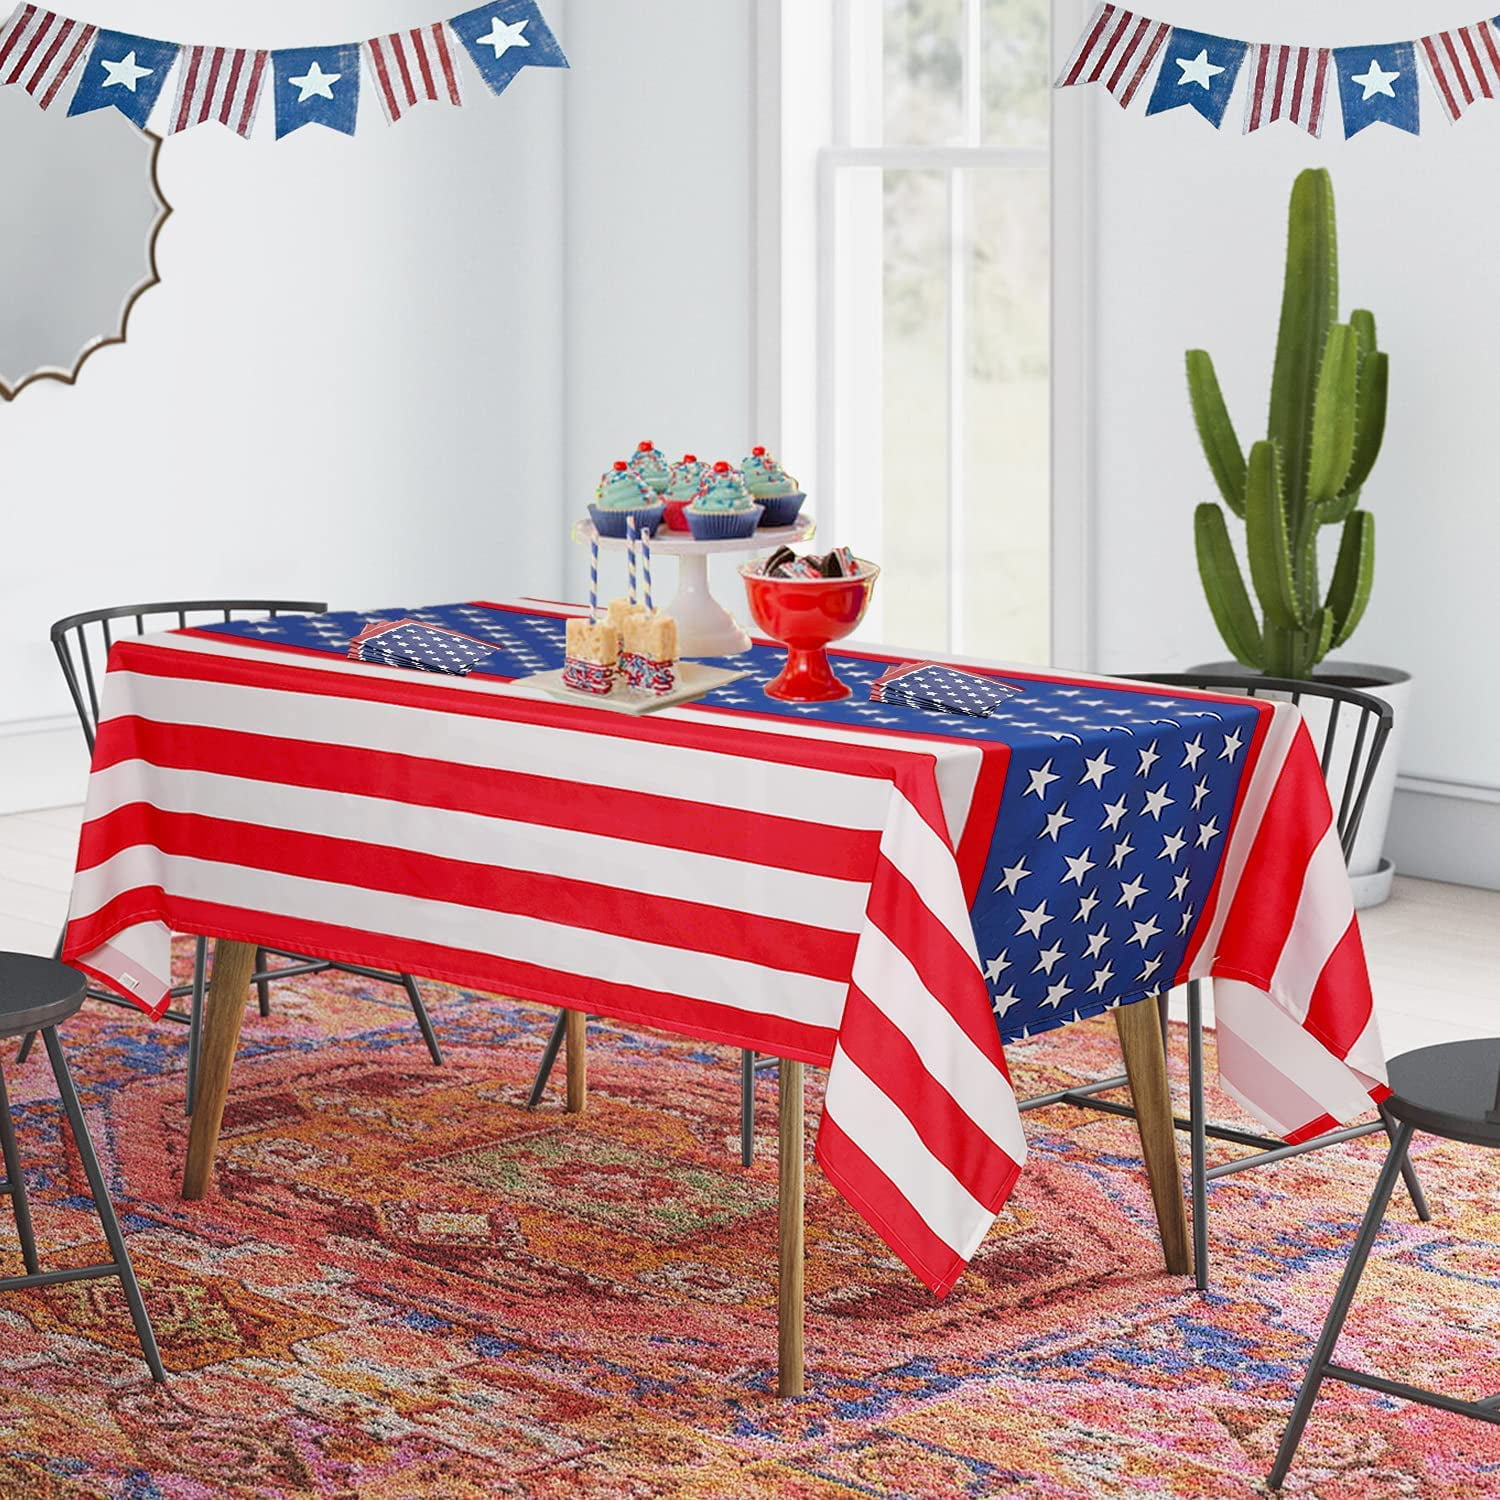 3 Pack Patriotic Tablecloth Decorations for Military Army Homecoming 54 x 108 Inch Plastic Memorial Day Table Cover Printed with Stars and Fireworks for Deployment Returning Party Supplies 